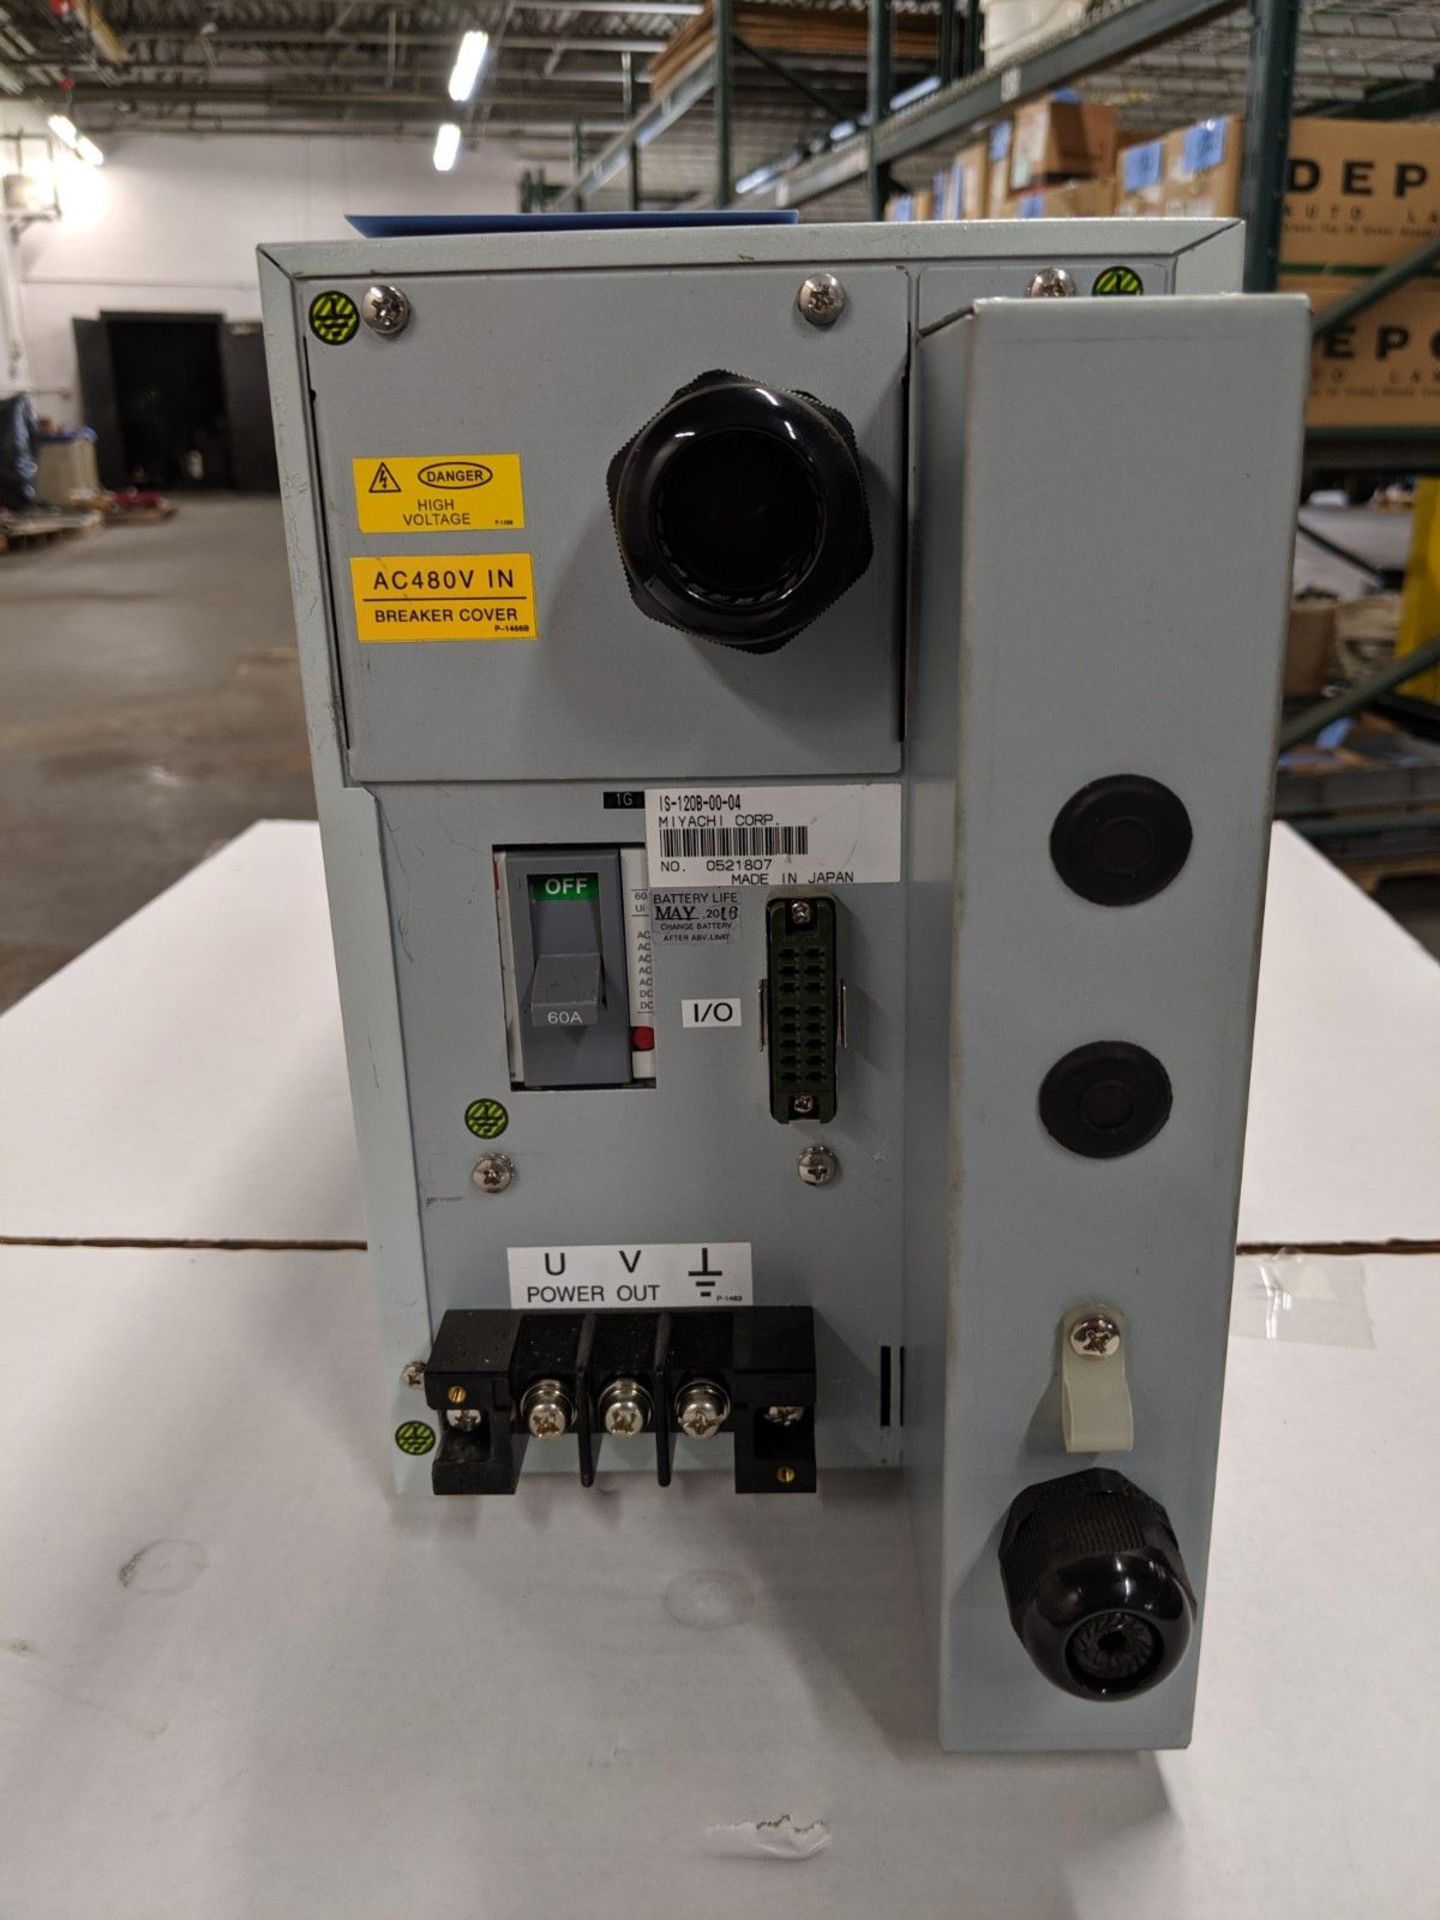 MIYACHI FINE SPOT INVERTER WELDING POWER SUPPLY, MODEL IS-120B, S/N 0521807 WITH DISK MANUAL - Image 3 of 4